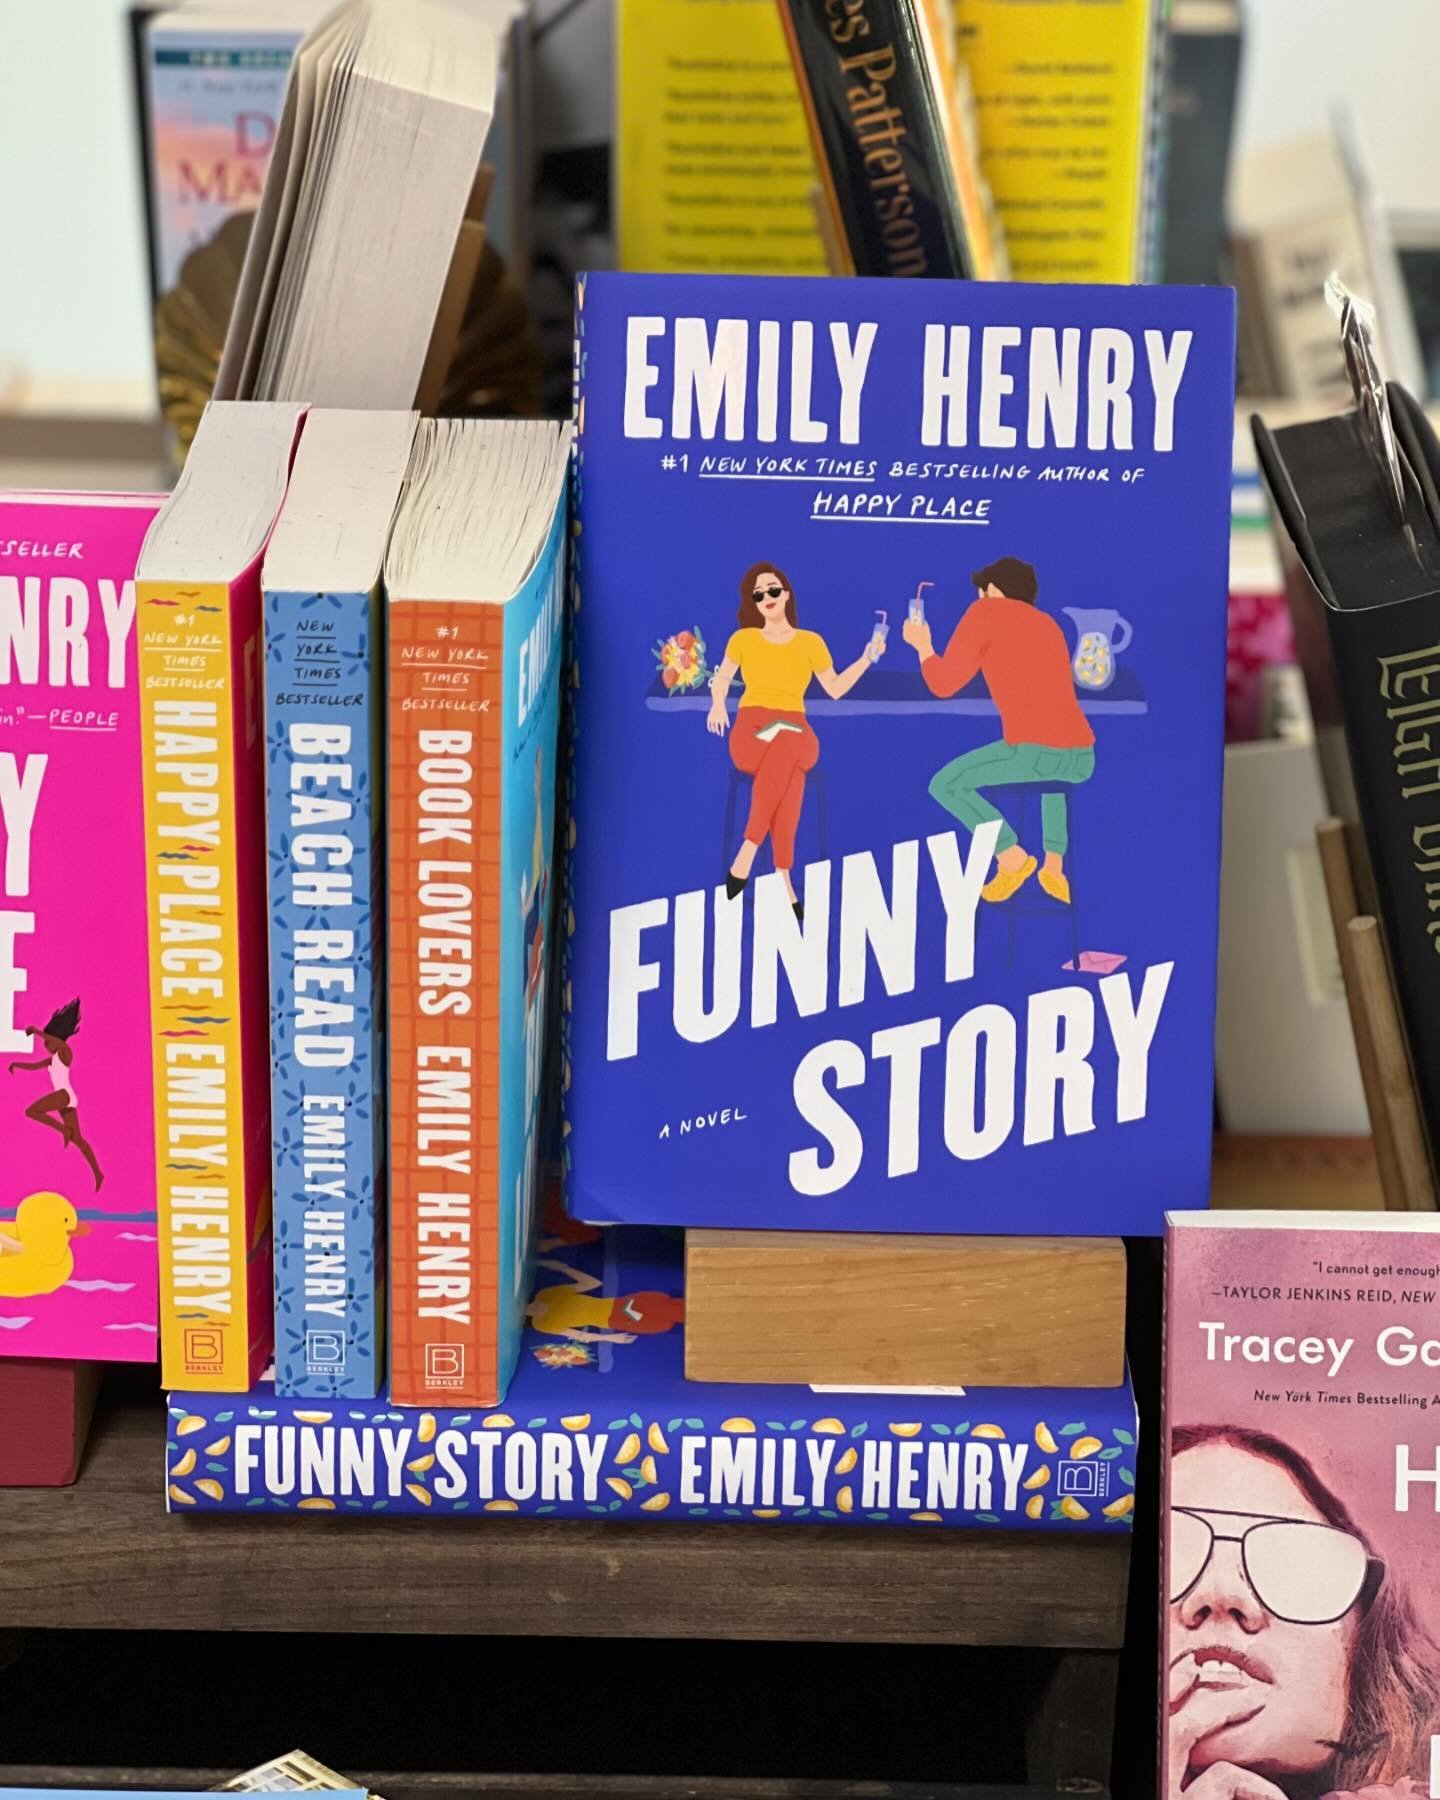 There&rsquo;s nothing like an @emilyhenrywrites novel on a  breezy beach day!  What&rsquo;s in your beach bag? #sanibel #sanibelisland #beach #beachread #booksbooksbooks #emilyhenry #funnystory